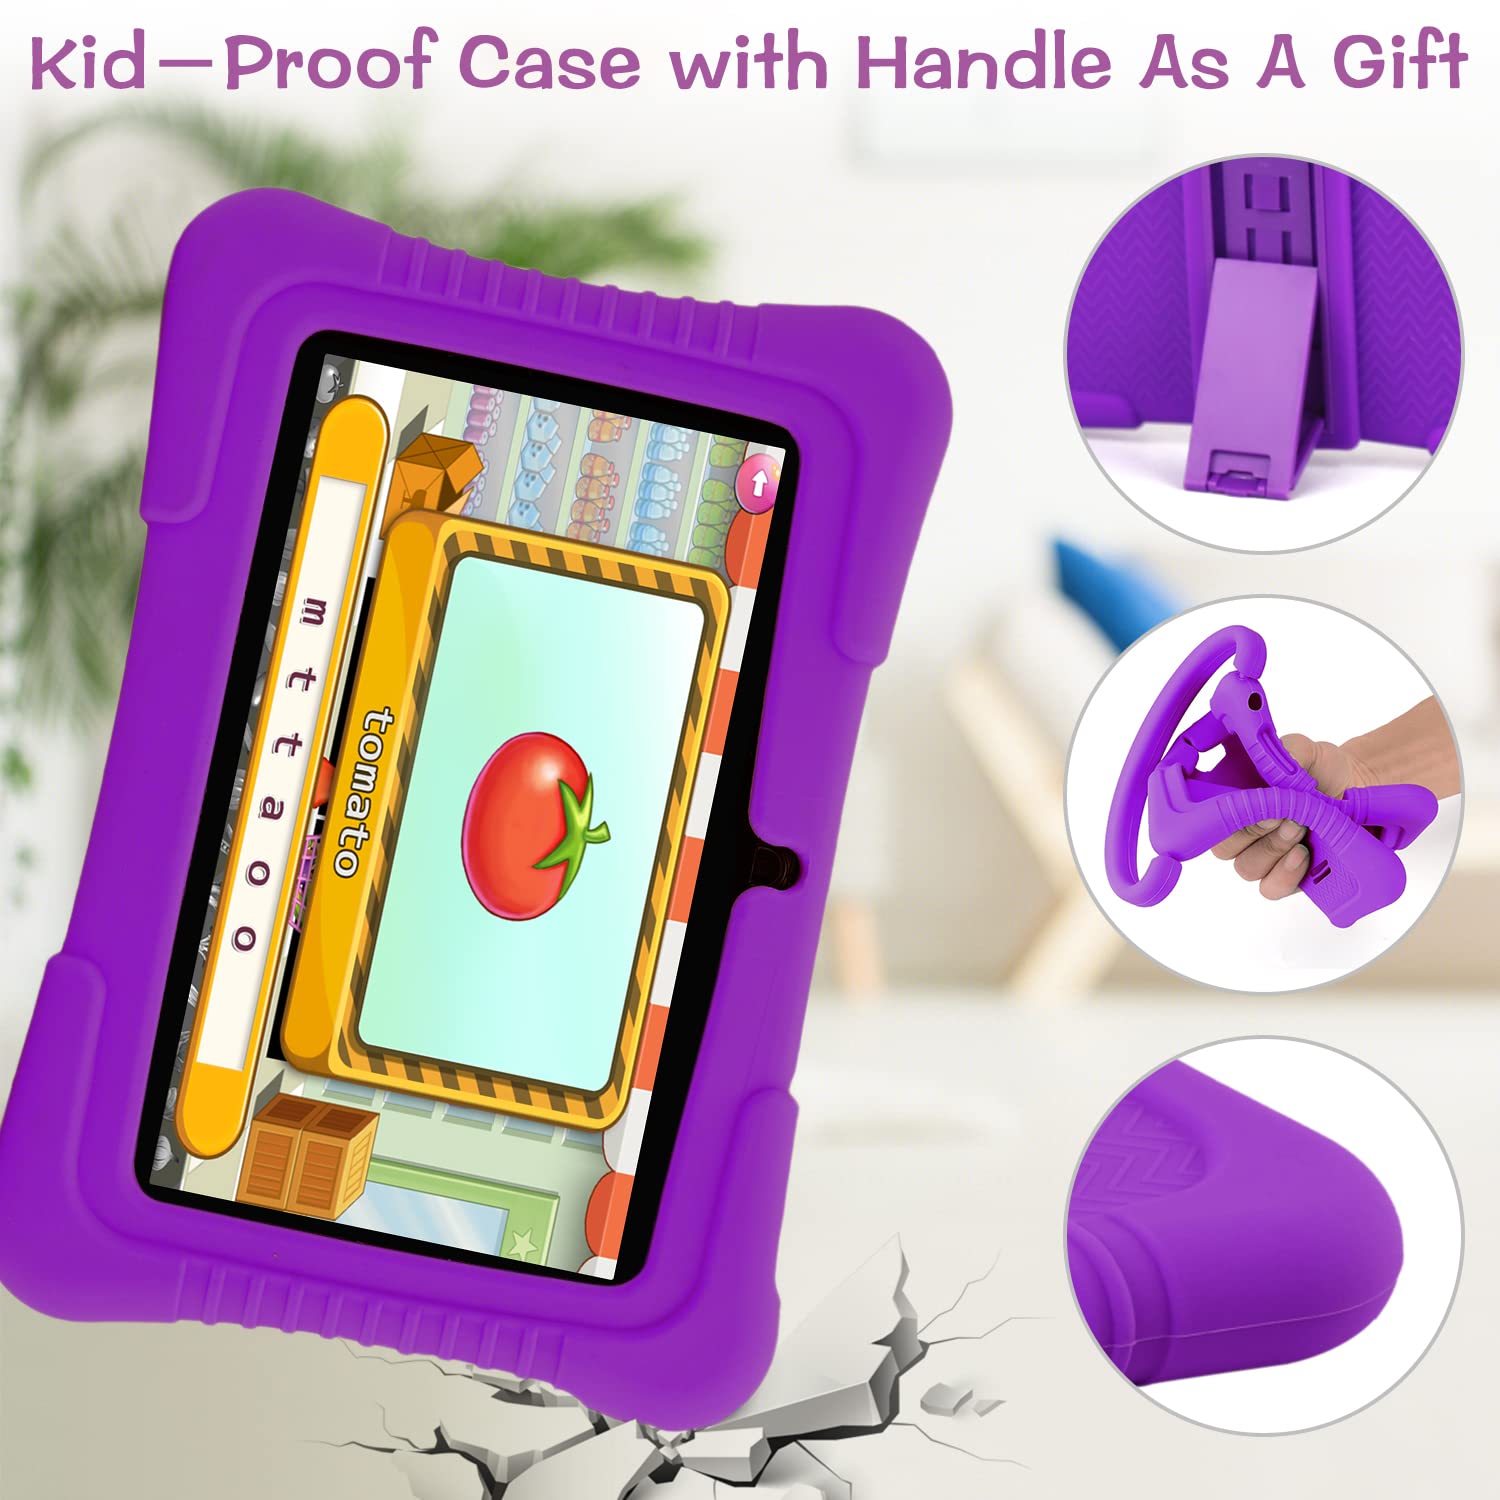 Veidoo Kids Tablet, 7 inch Android Tablet PC, 2GB RAM 32GB ROM, Safety Eye Protection Screen, WiFi, Dual Camera, Games, Parental Control APP, Tablet with Silicone Case(Purple)